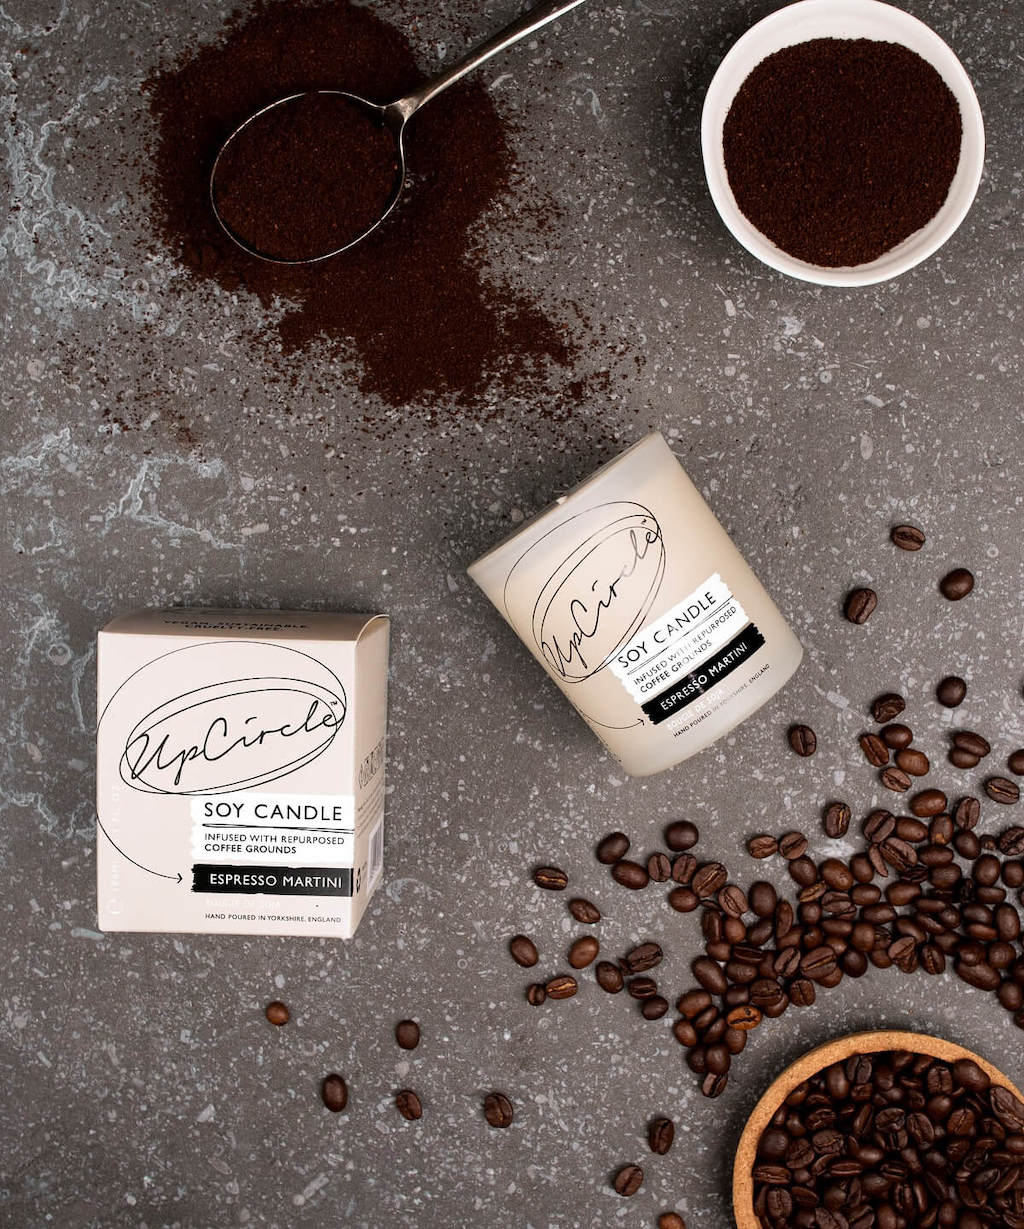 UpCircle Espresso Martini Soy Candle. Natural candle. The candle is shown laying on the ground next to it's box, with coffee beans and grounds dispersed around it.